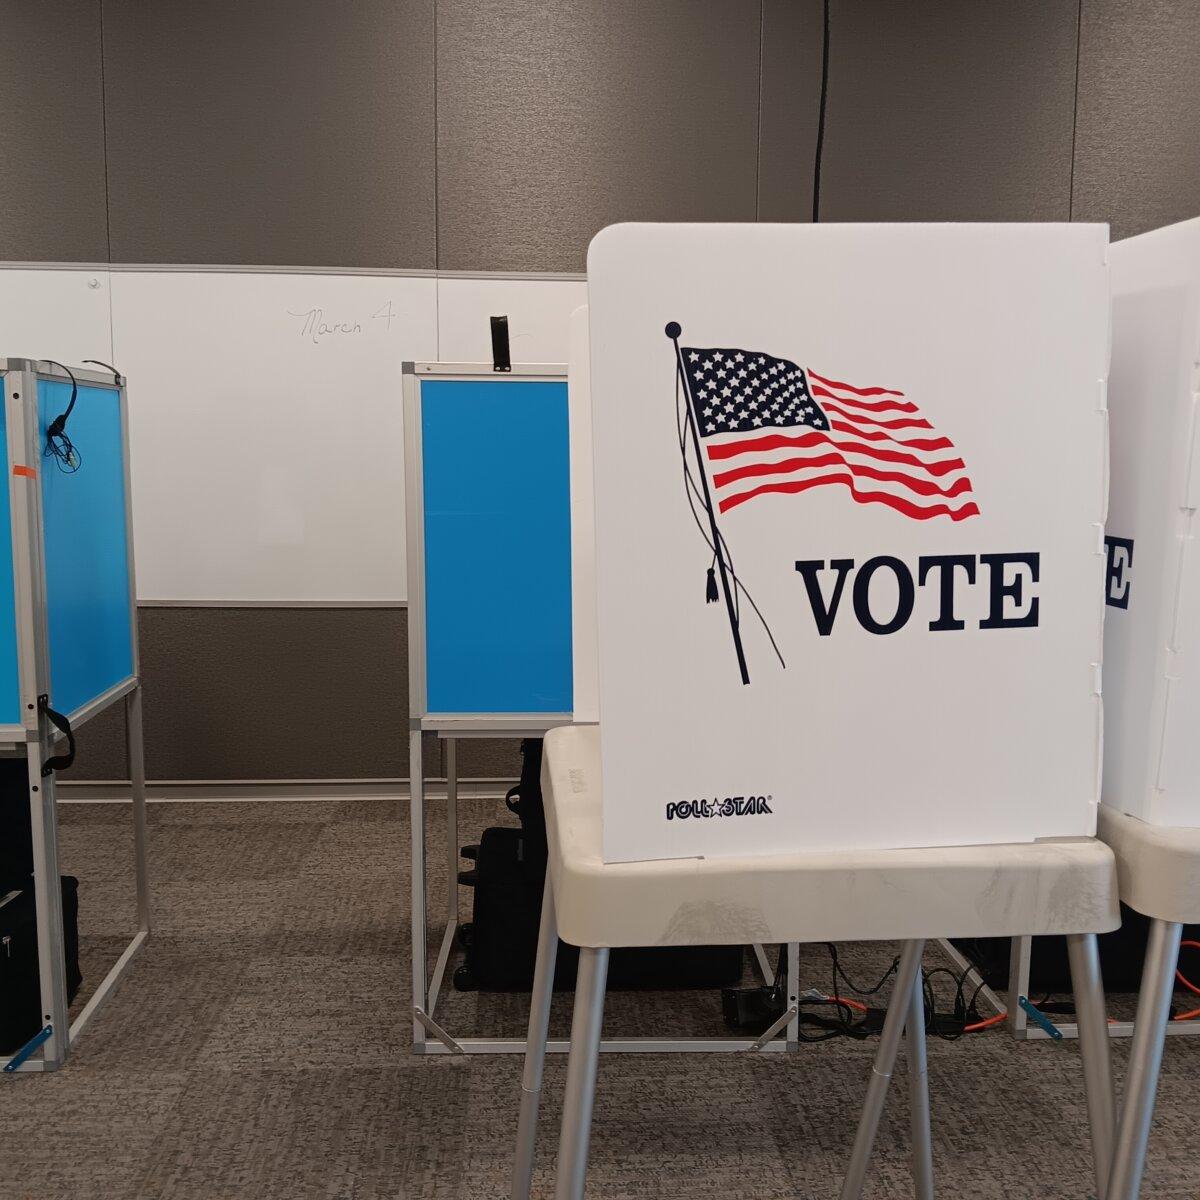 Voting booths at Belmar Library in Jefferson County, Color., on March 4. Early voting and ballot drop-offs wind down ahead of Super Tuesday, March 5, when Colorado and many other states will hold their primary elections. (Nathan Worcester/The Epoch Times)